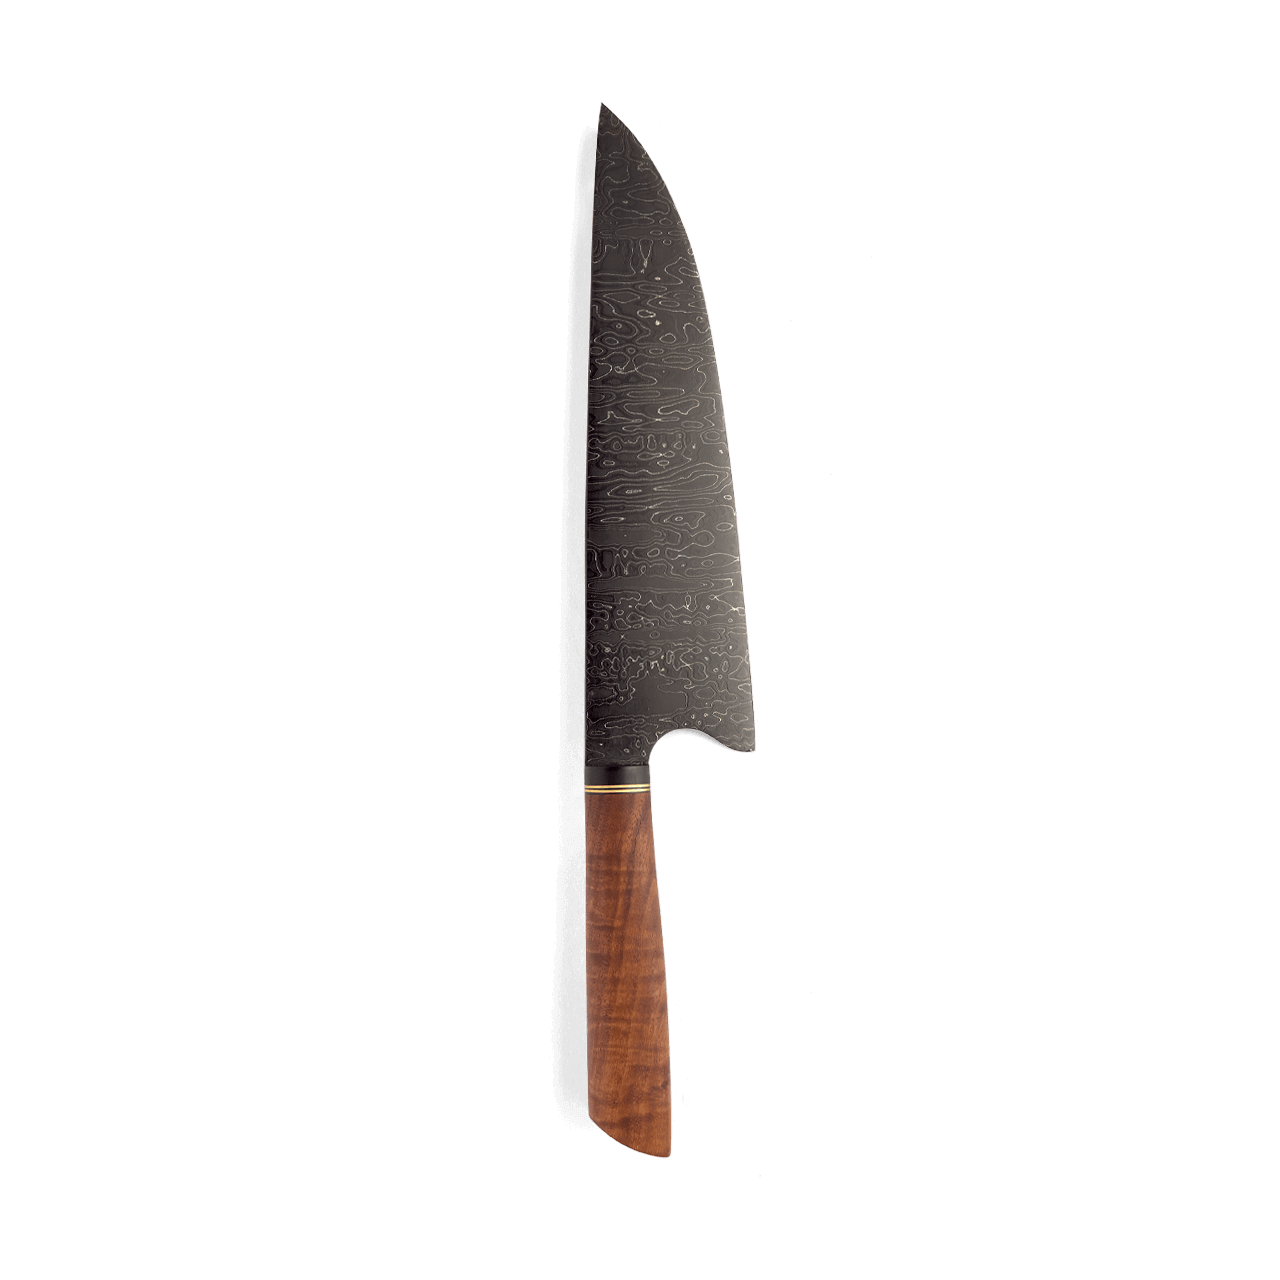 https://cdn11.bigcommerce.com/s-iai44k5nej/images/stencil/1280x1280/products/1357/2881/Phillips_Forged_Hawksbill_Knife-0004__56121.1645819722.1280.1280__35766.1671735526.png?c=1